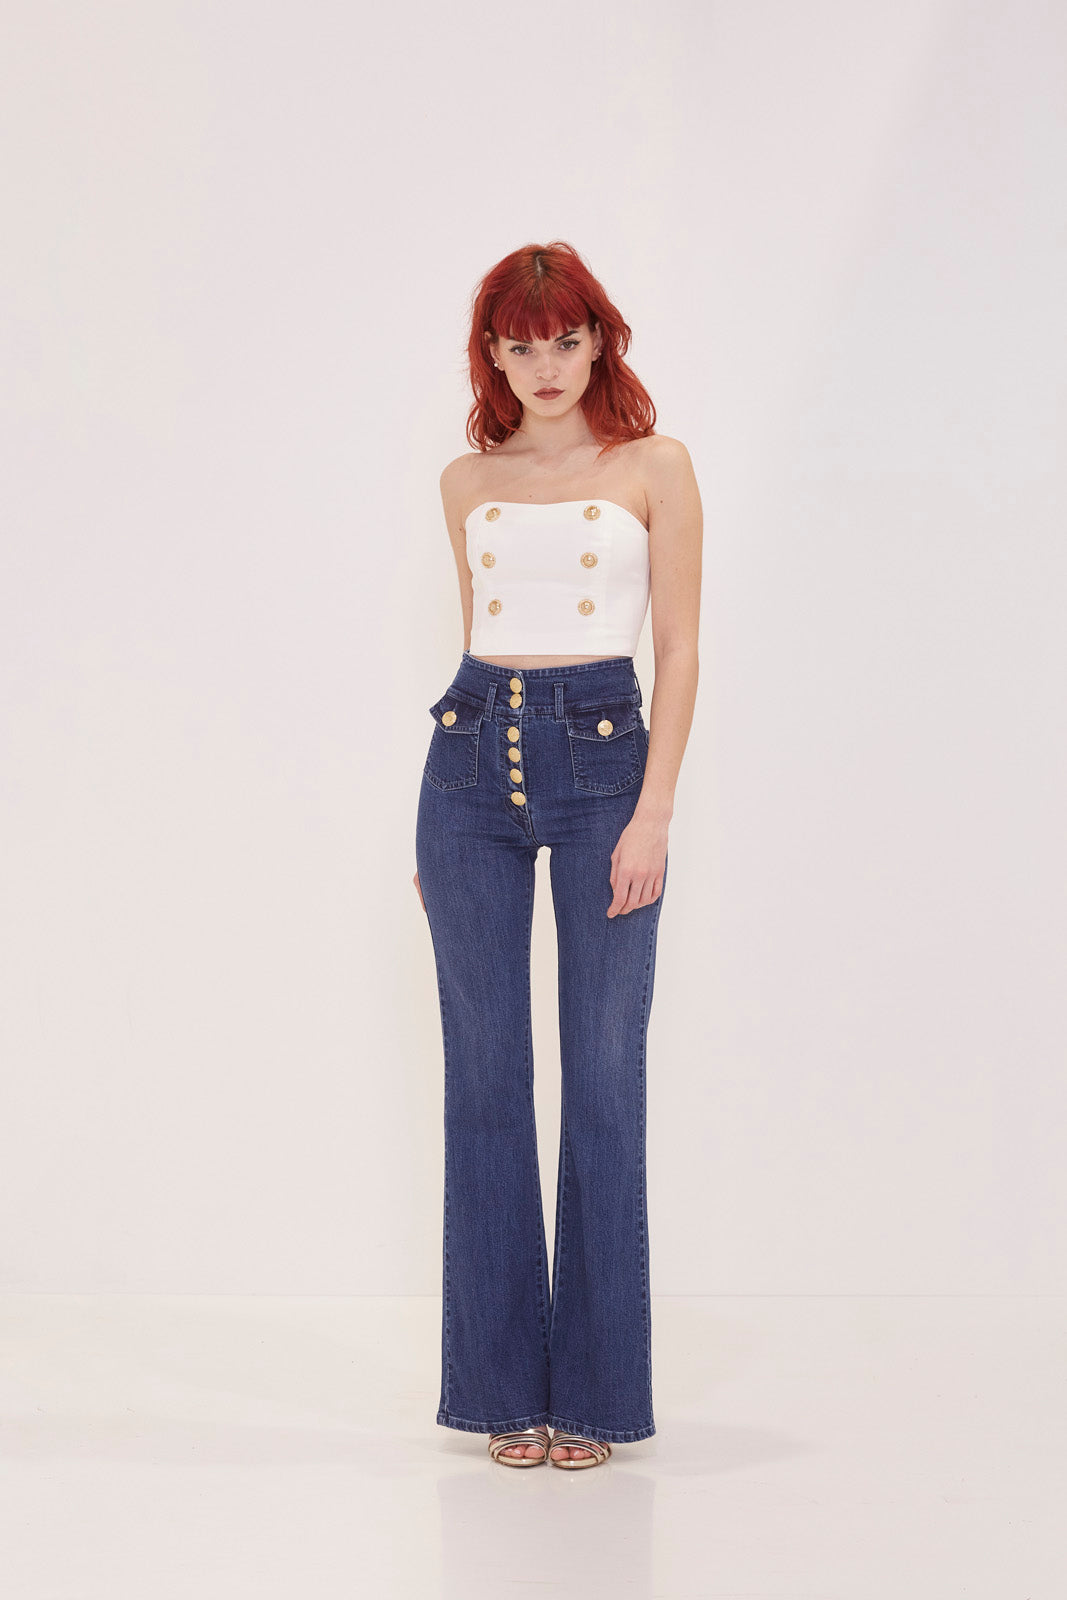 Adele trousers in Blue Zampa denim with FC gold buttons